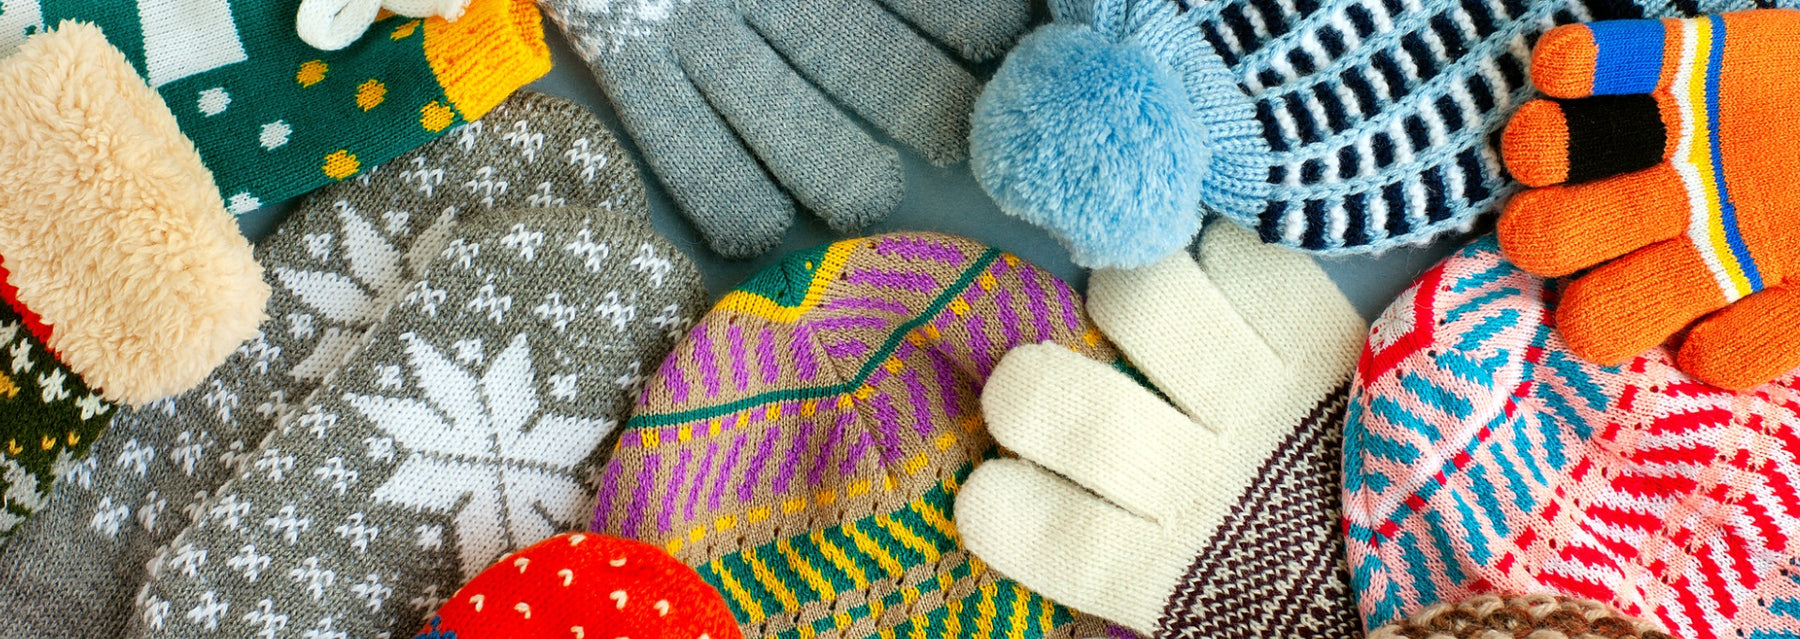 Bulk Winter Hats and Gloves Warm Heads, Hands and Hearts